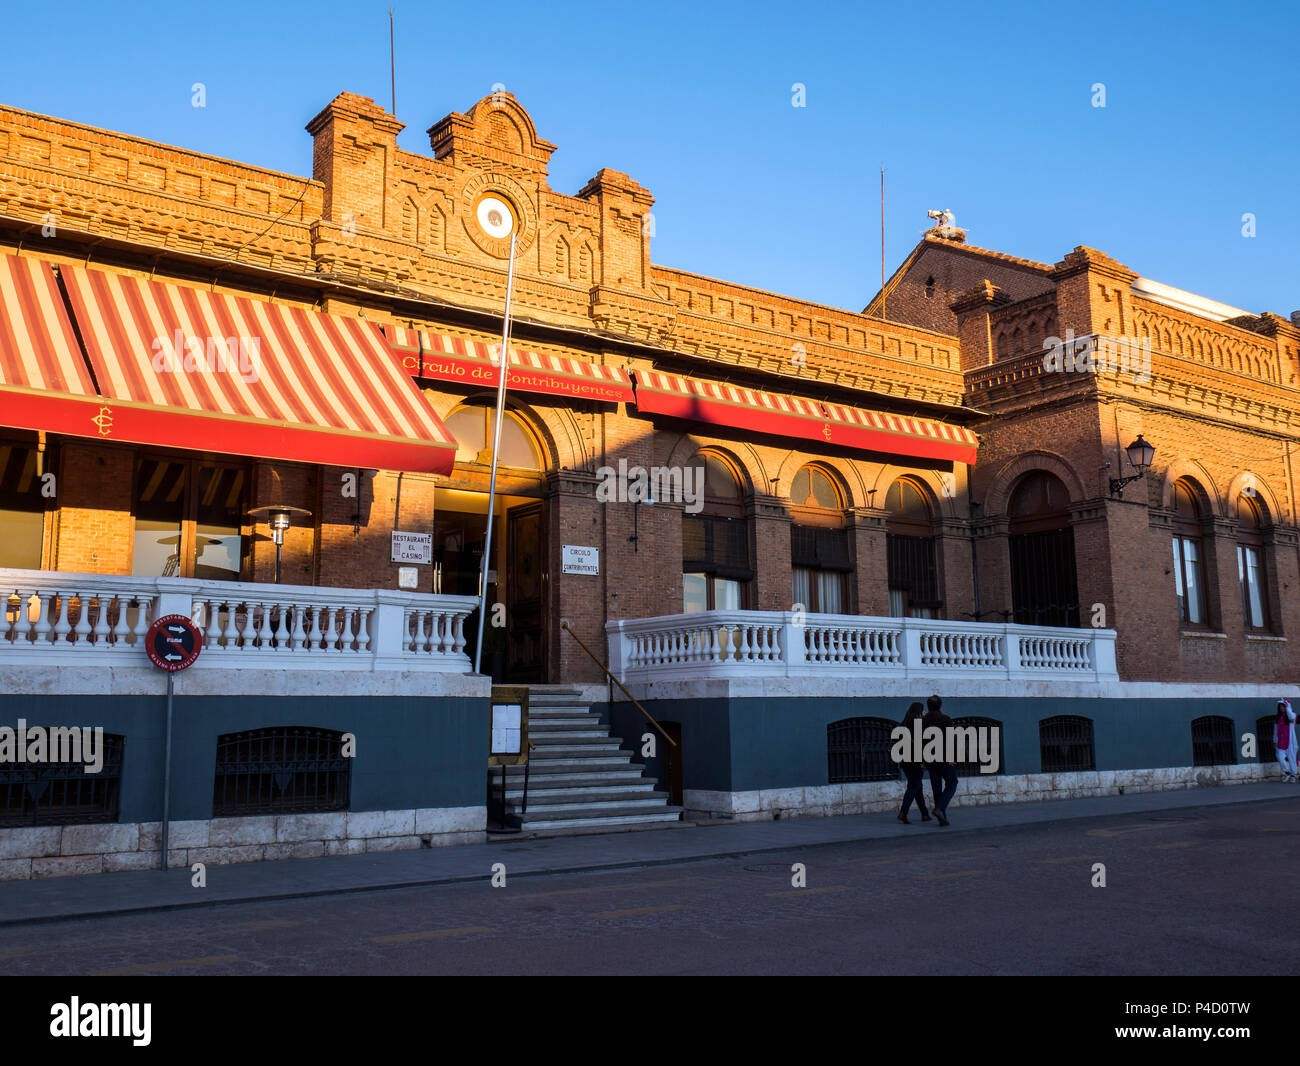 Restaurante de madrid High Resolution Stock Photography and Images - Alamy